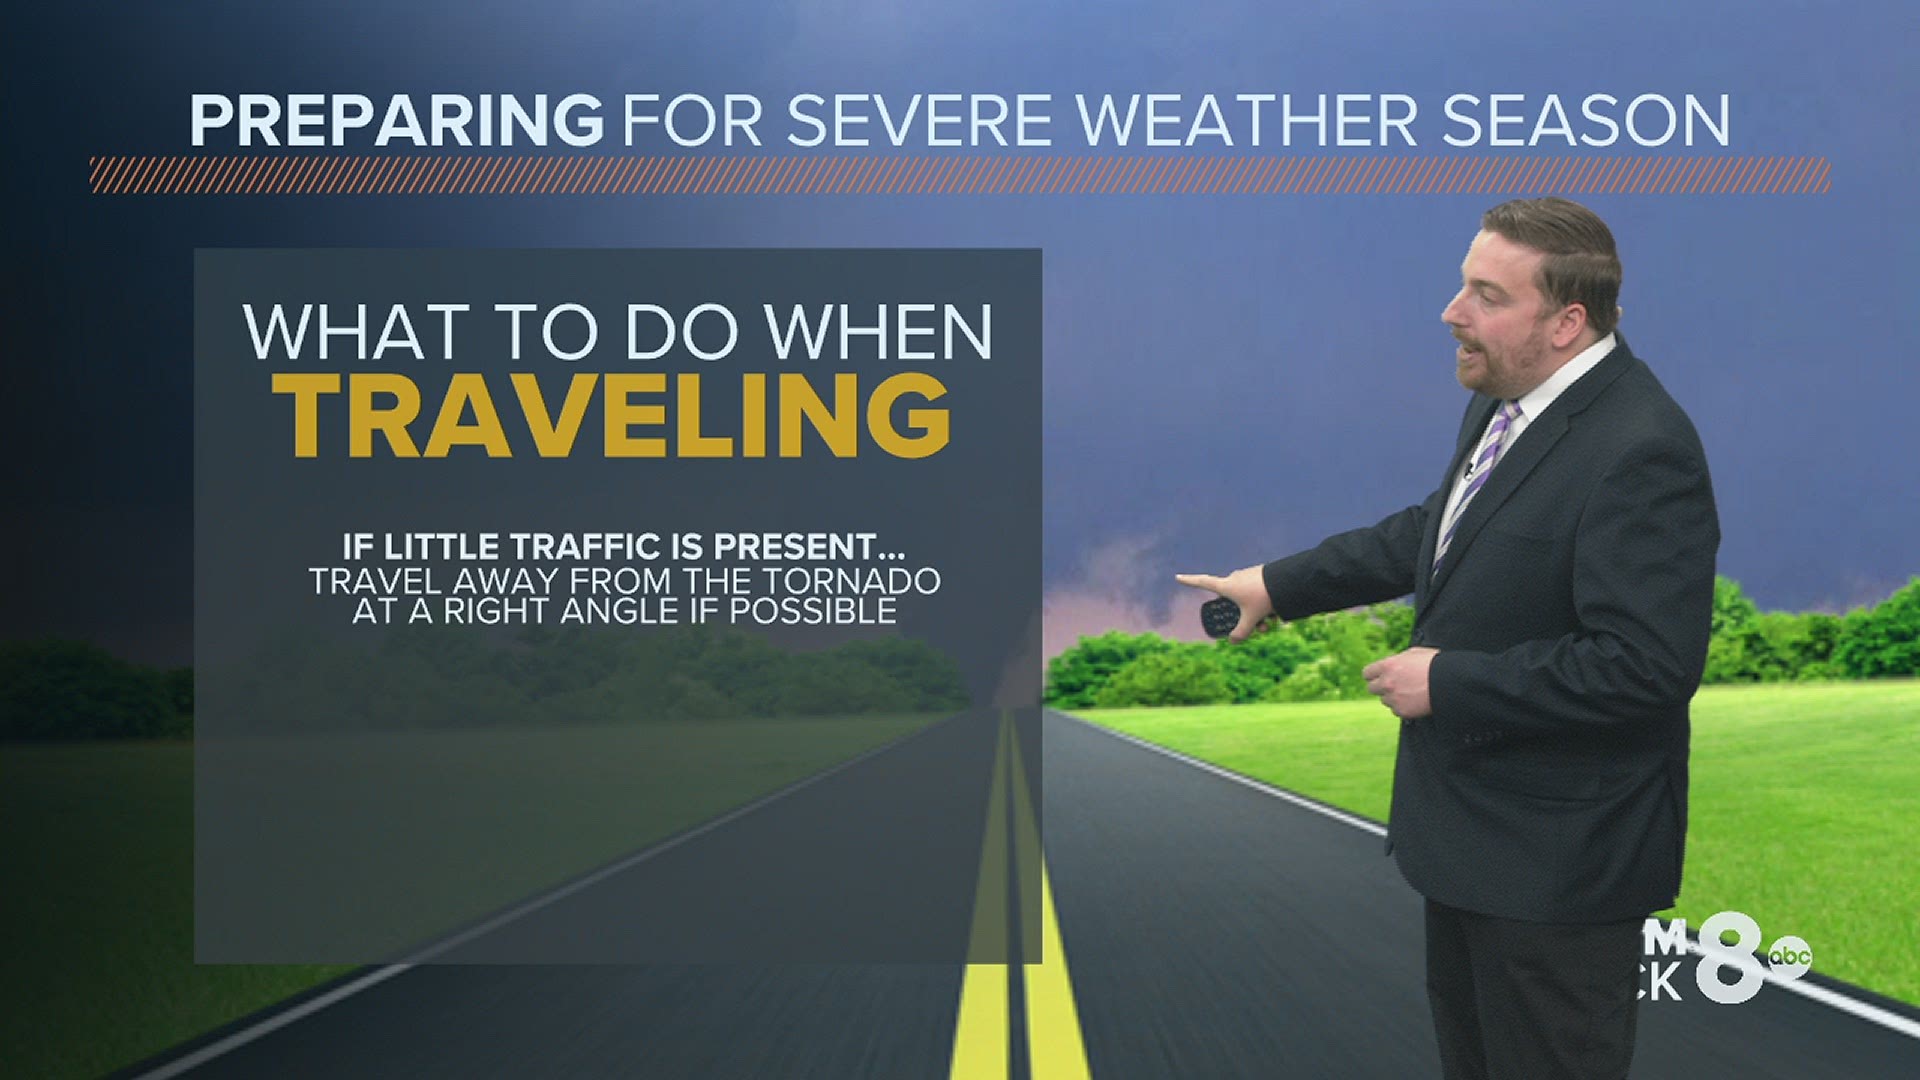 What should you do if you encounter a tornado while traveling in a vehicle?